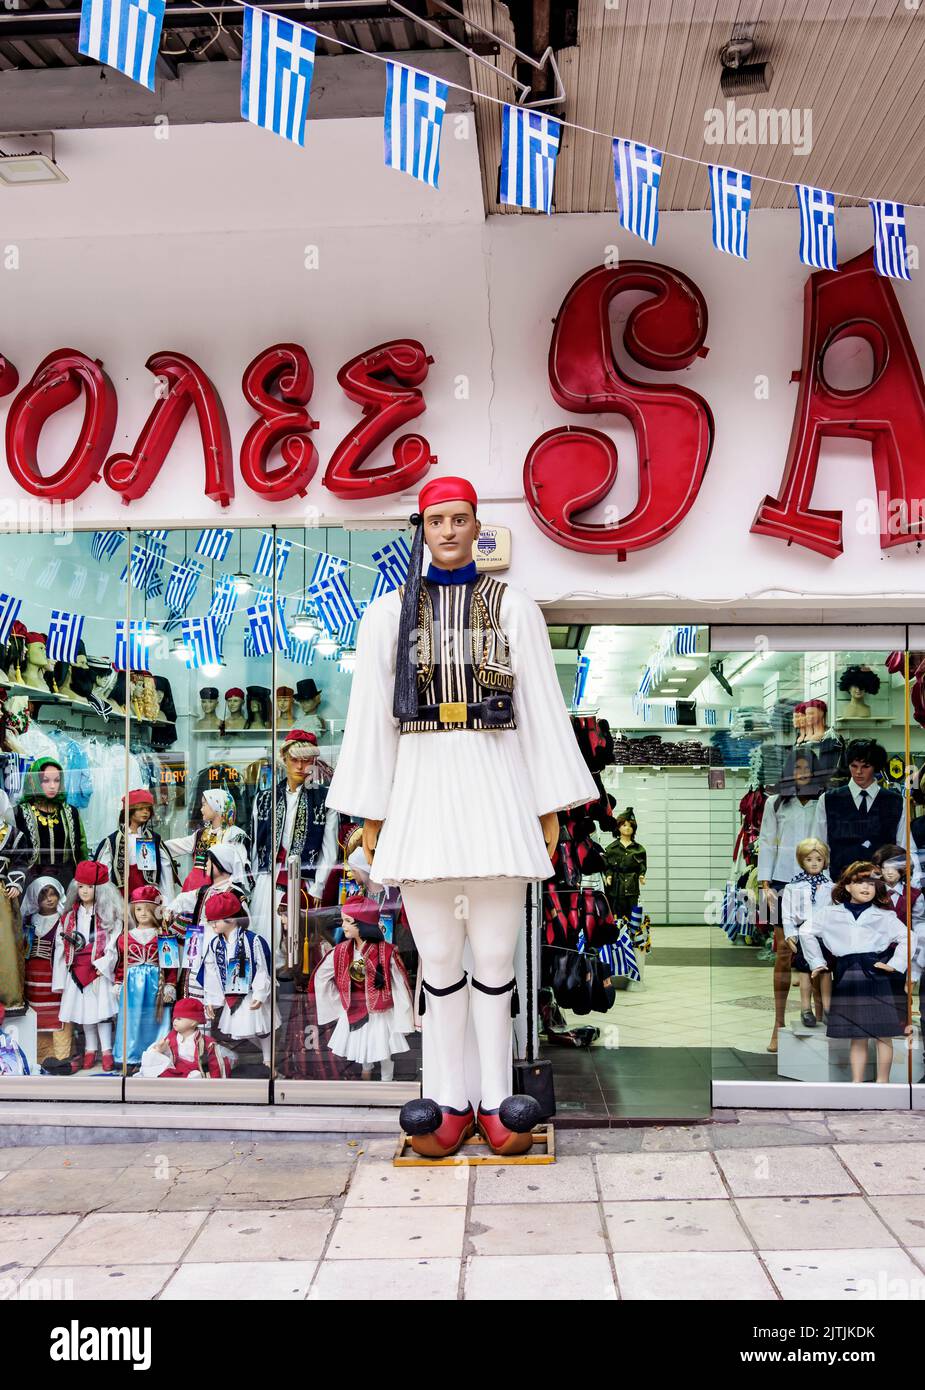 Shop with traditional clothing, Thessaloniki, Central Macedonia, Greece Stock Photo